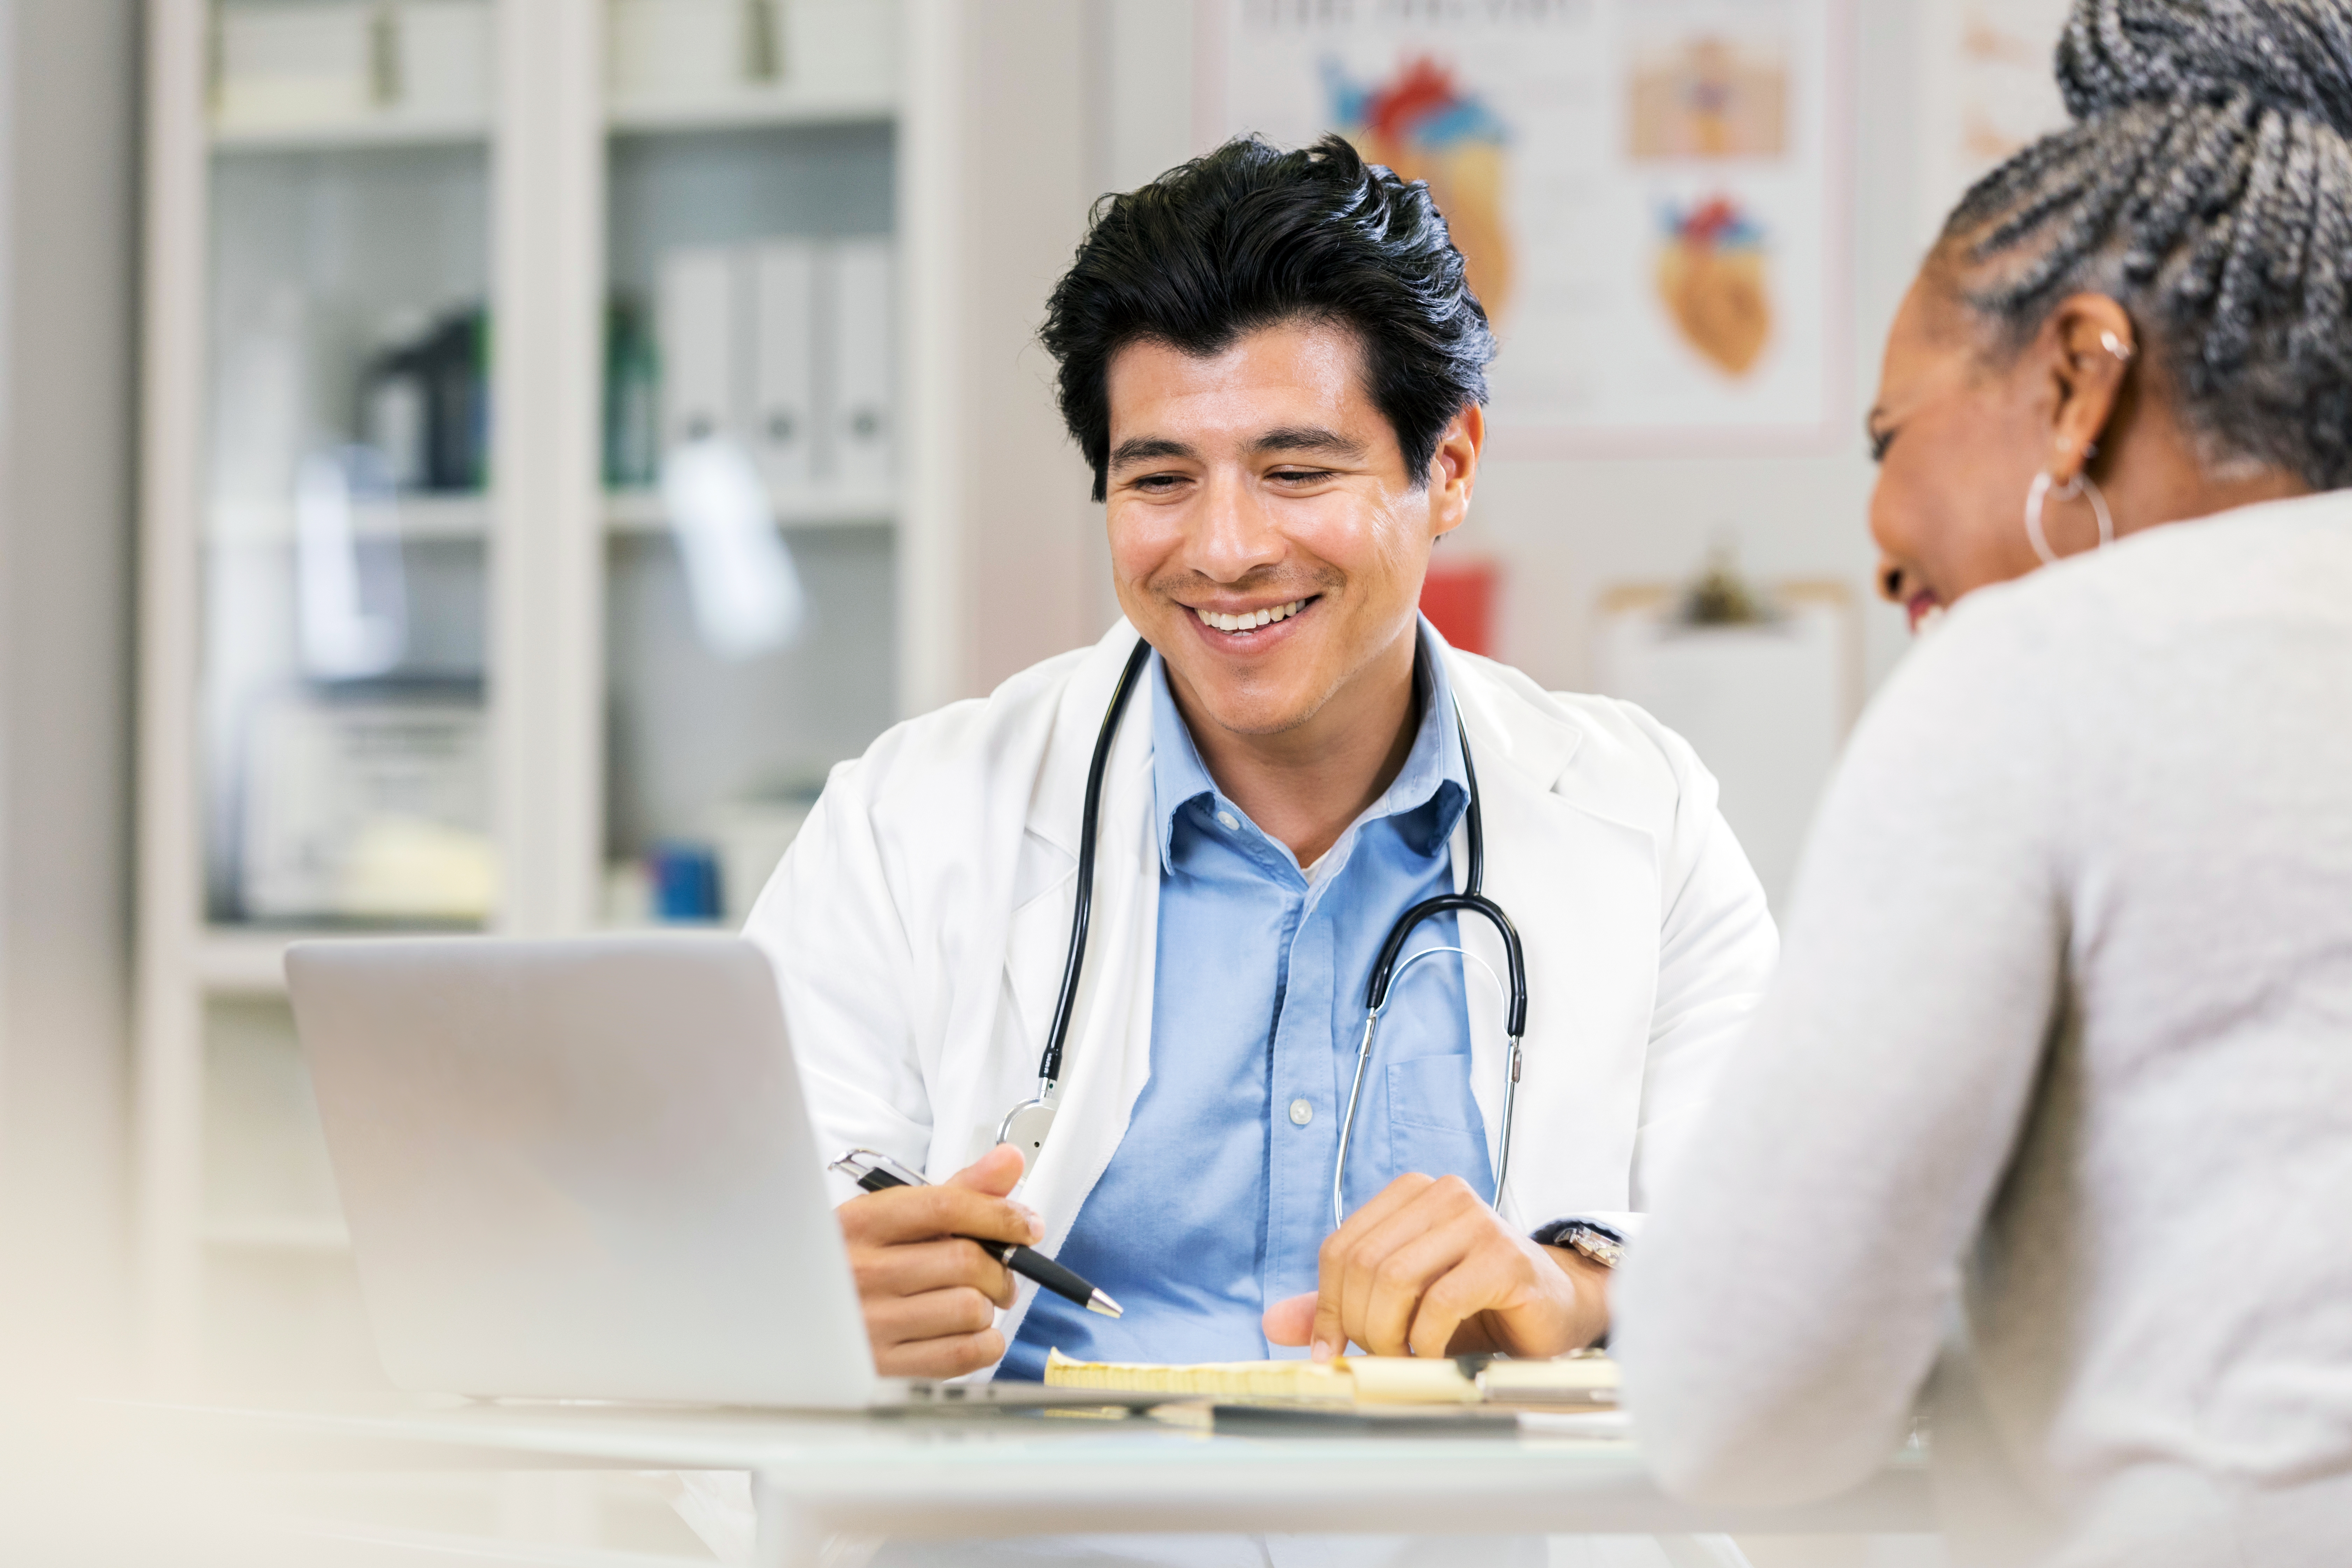 How to abbreviate doctor in Spanish with an image of a smiling doctor with stethoscope.